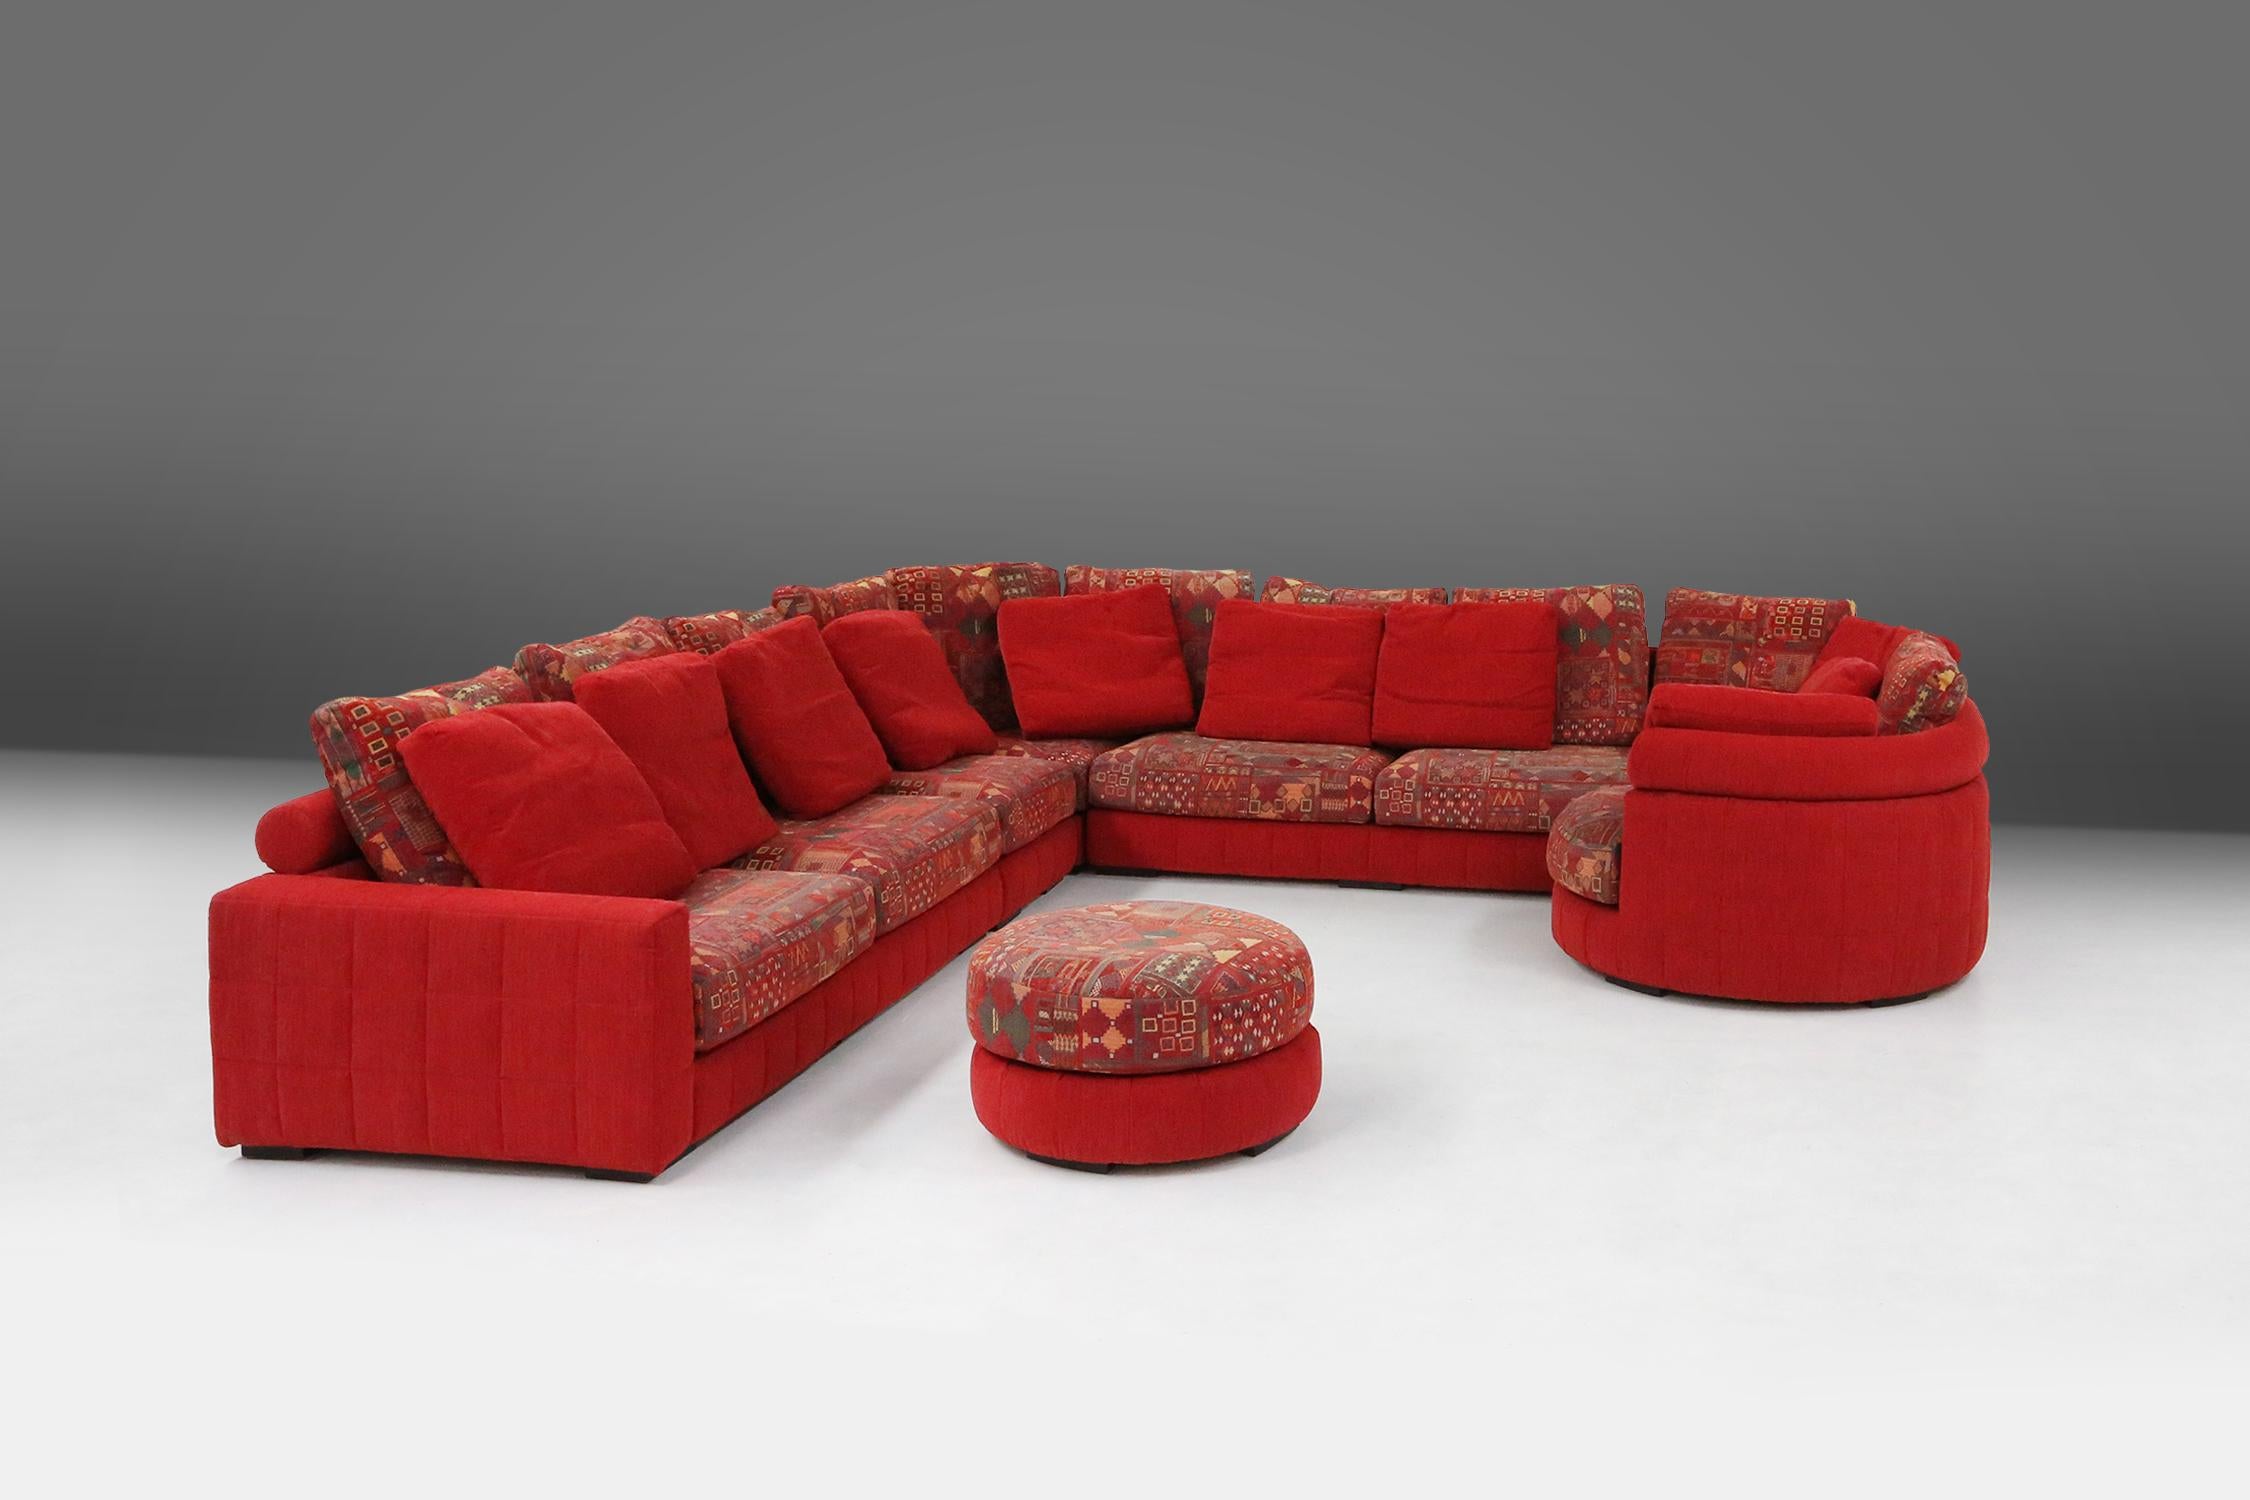 Fabric Roche Bobois modular sofa in red and patterned upholstery 1980 For Sale